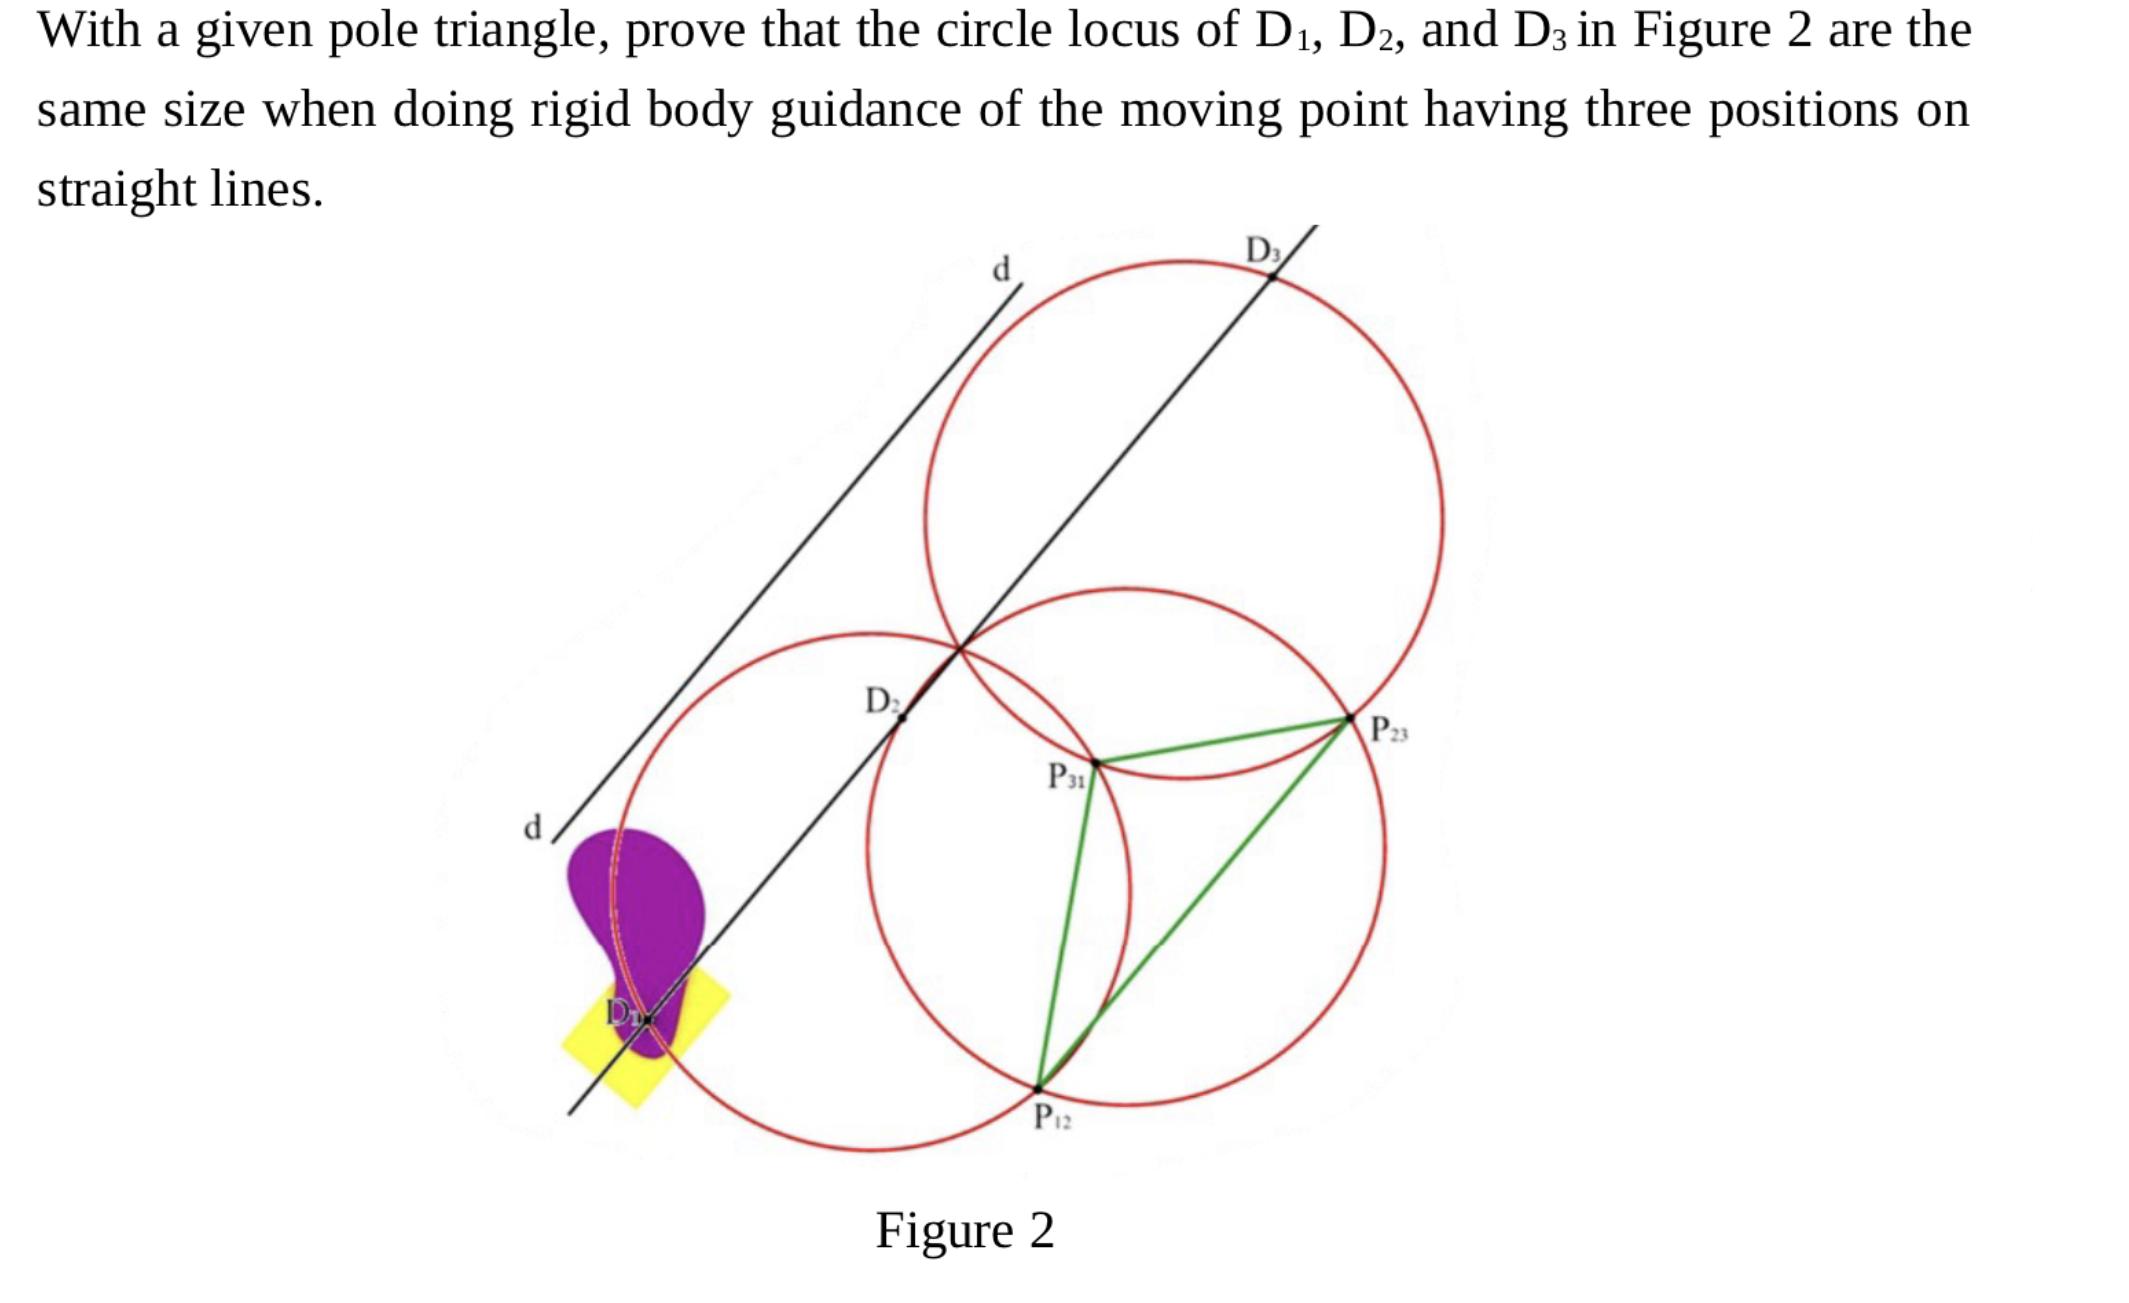 With a given pole triangle, prove that the circle locus of D, D2, and D3 in Figure 2 are the same size when